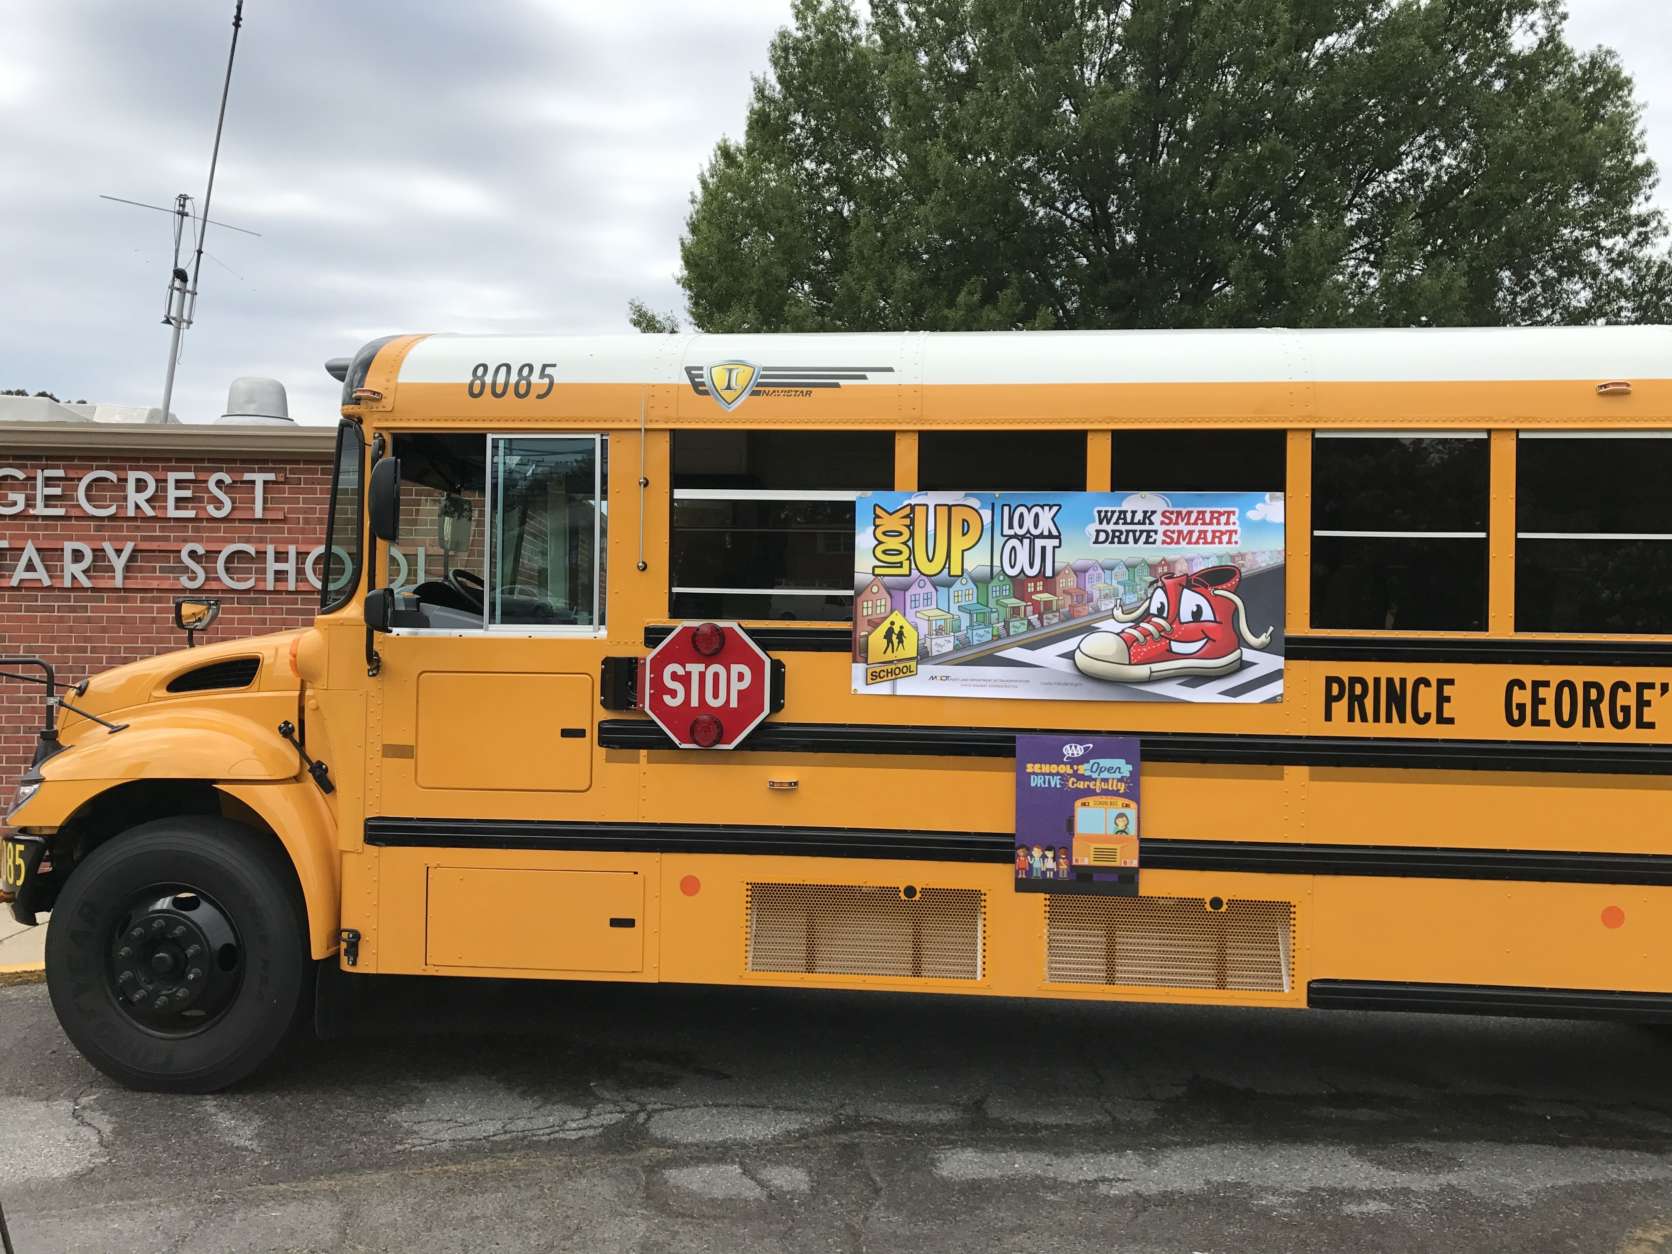 Drivers in both directions are required to stop when a school bus stops, its red lights are flashing and its stop sign flap is deployed. (WTOP/Dick Uliano)